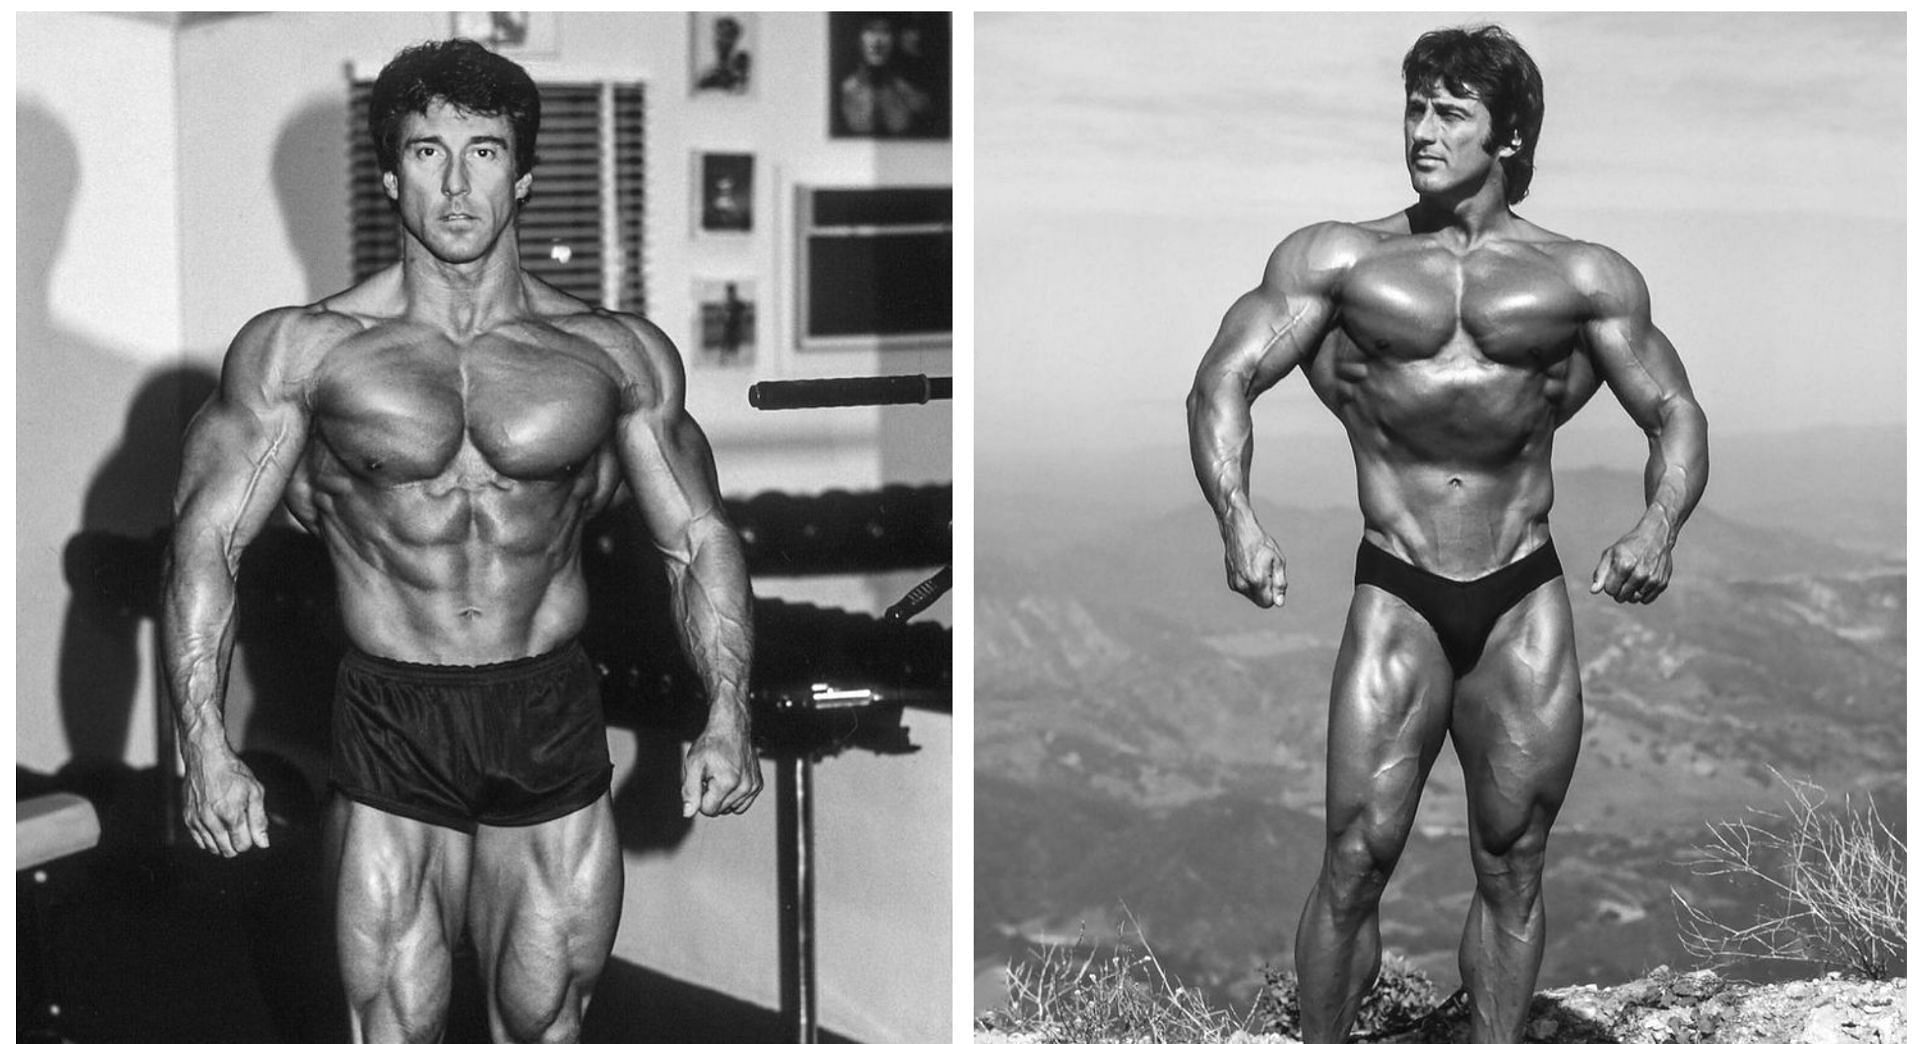 Frank Zane is regarded as one of the greatest bodybuilders of all times. (Image via Instagram)